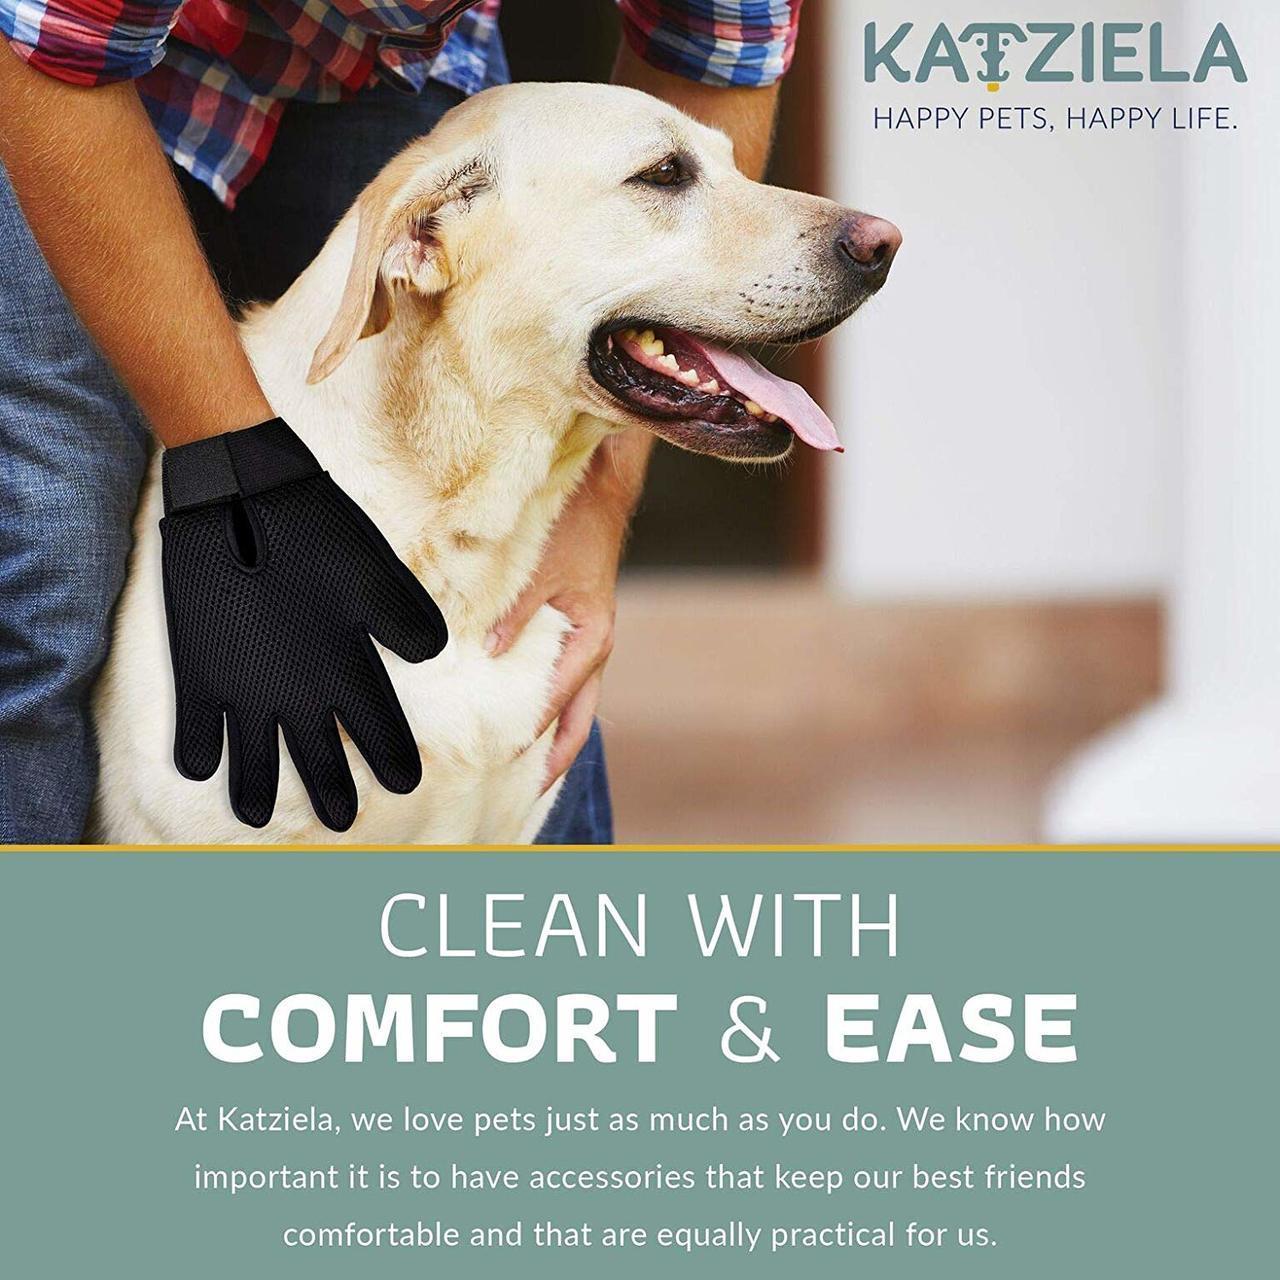 Pet Grooming Gloves, Soft Grooming Glove for Pets, Effective